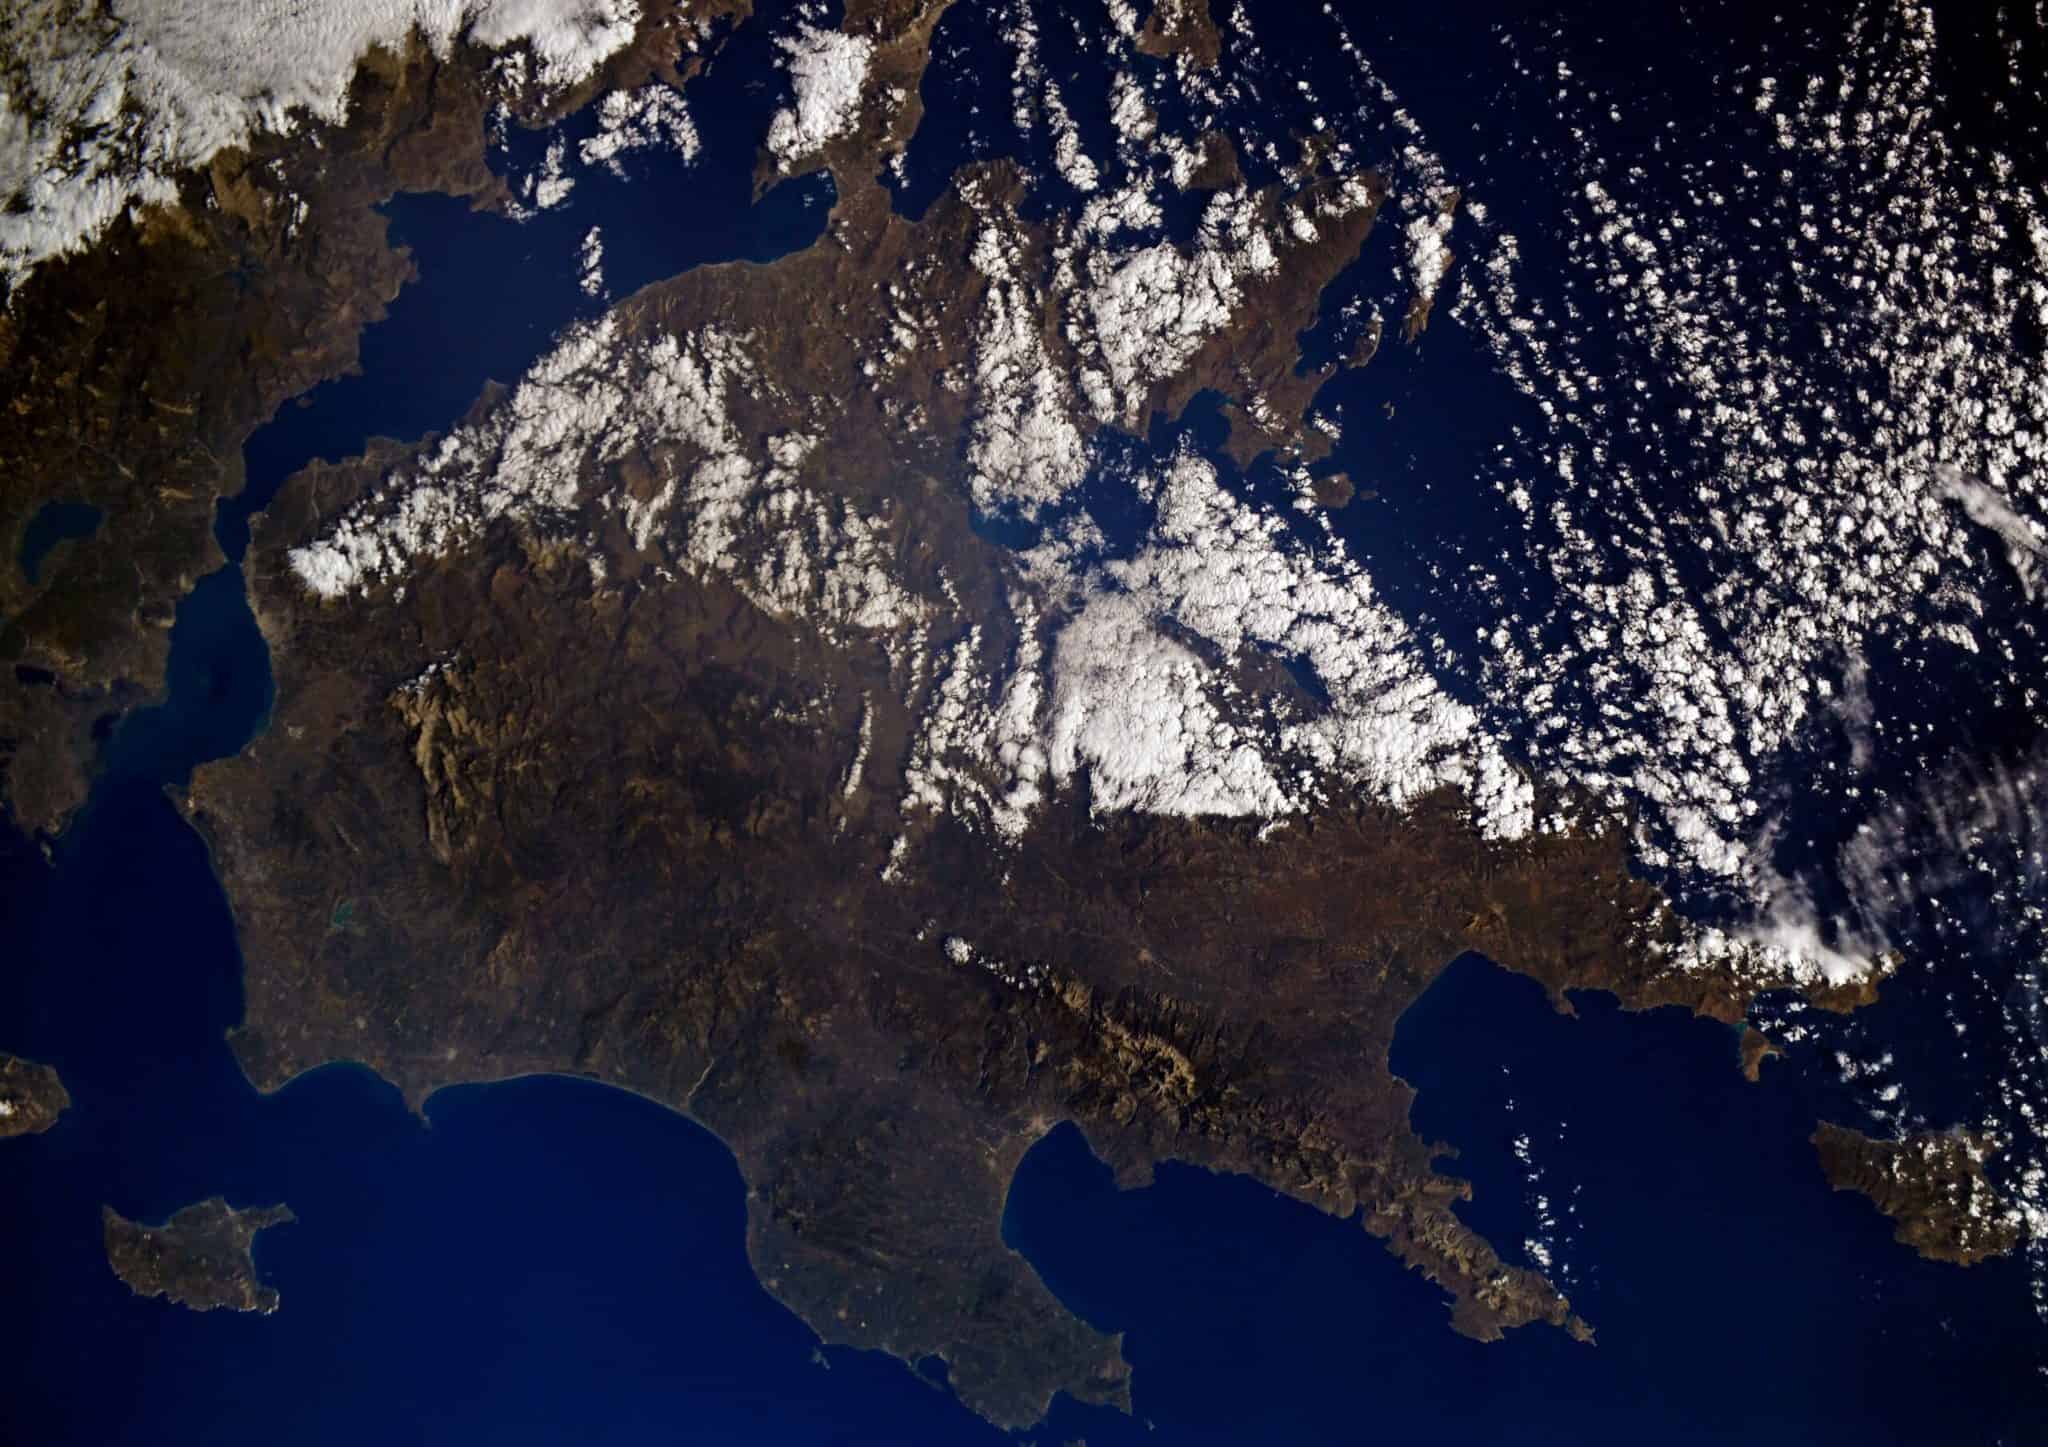 Greece from Space